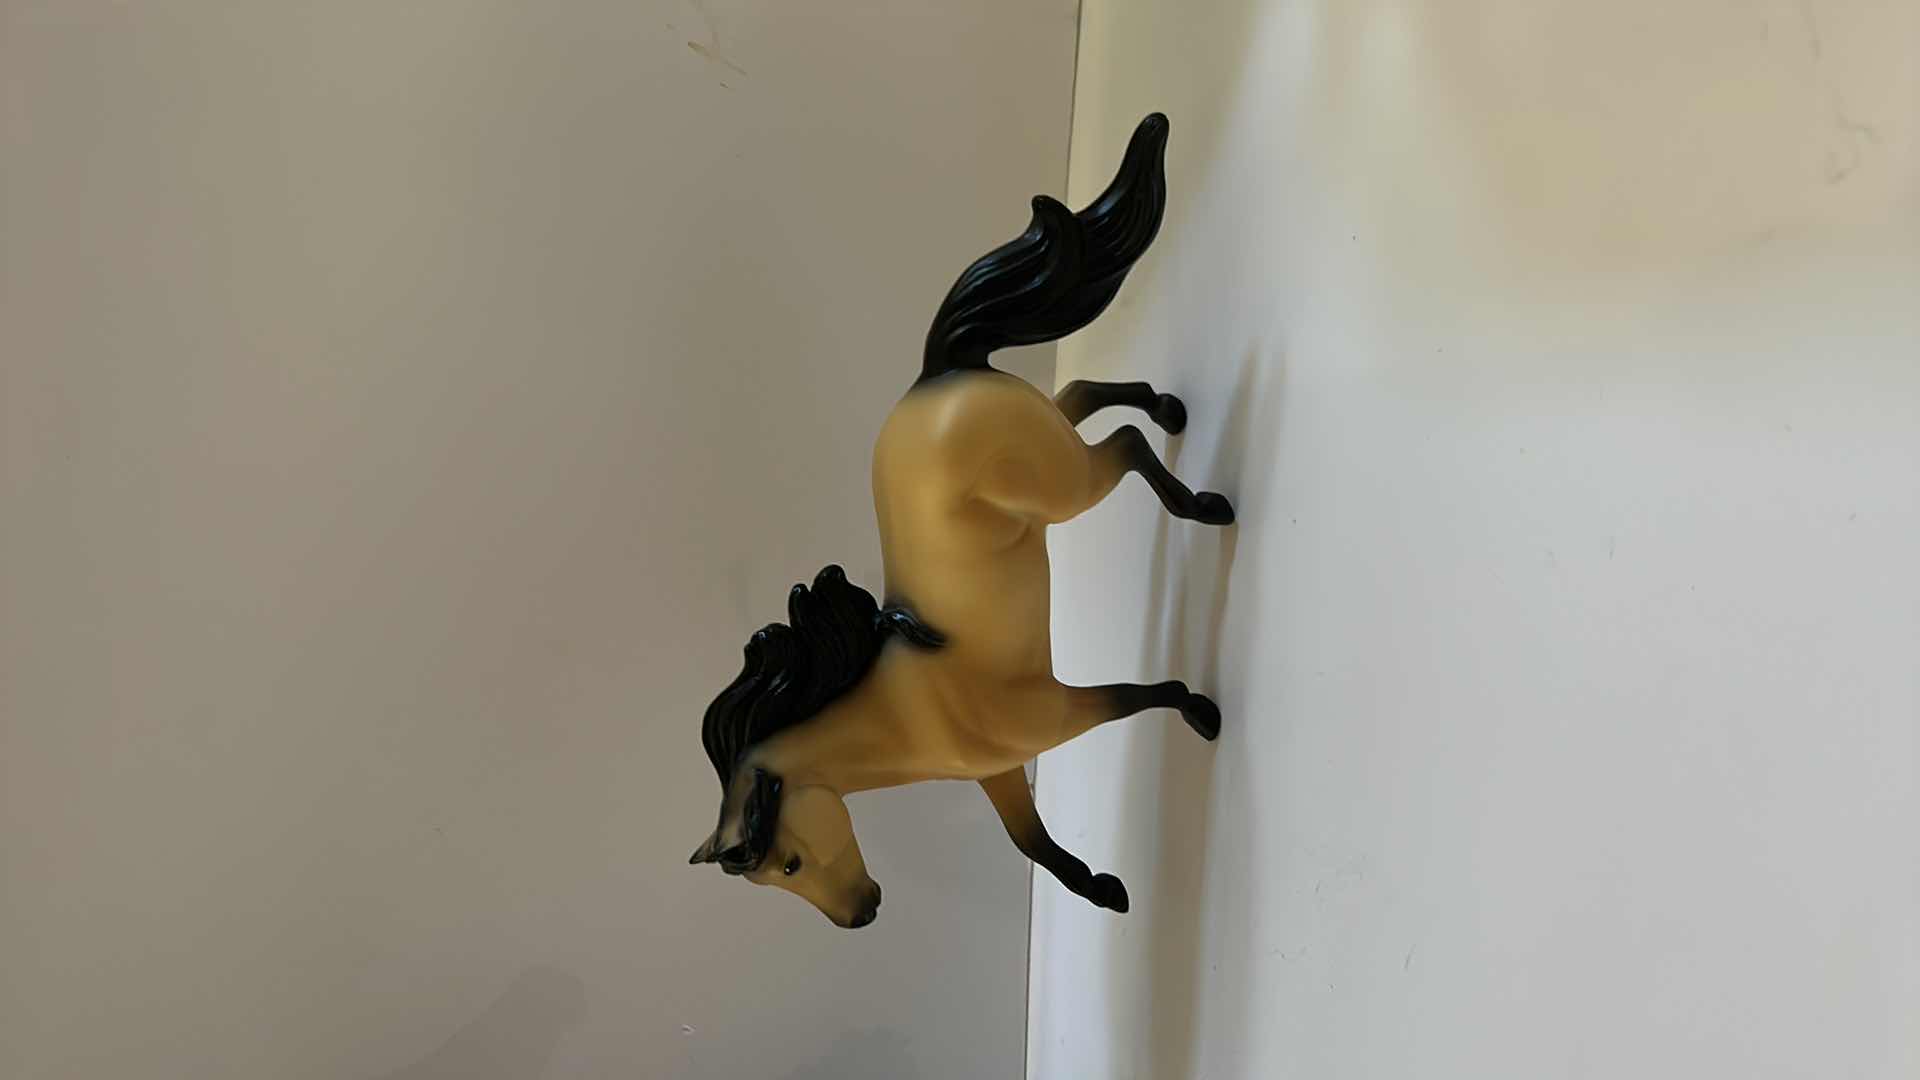 Photo 2 of 2 BREYER COLLECTIBLE HORSES TALLEST 10.5” & 3 DOGS